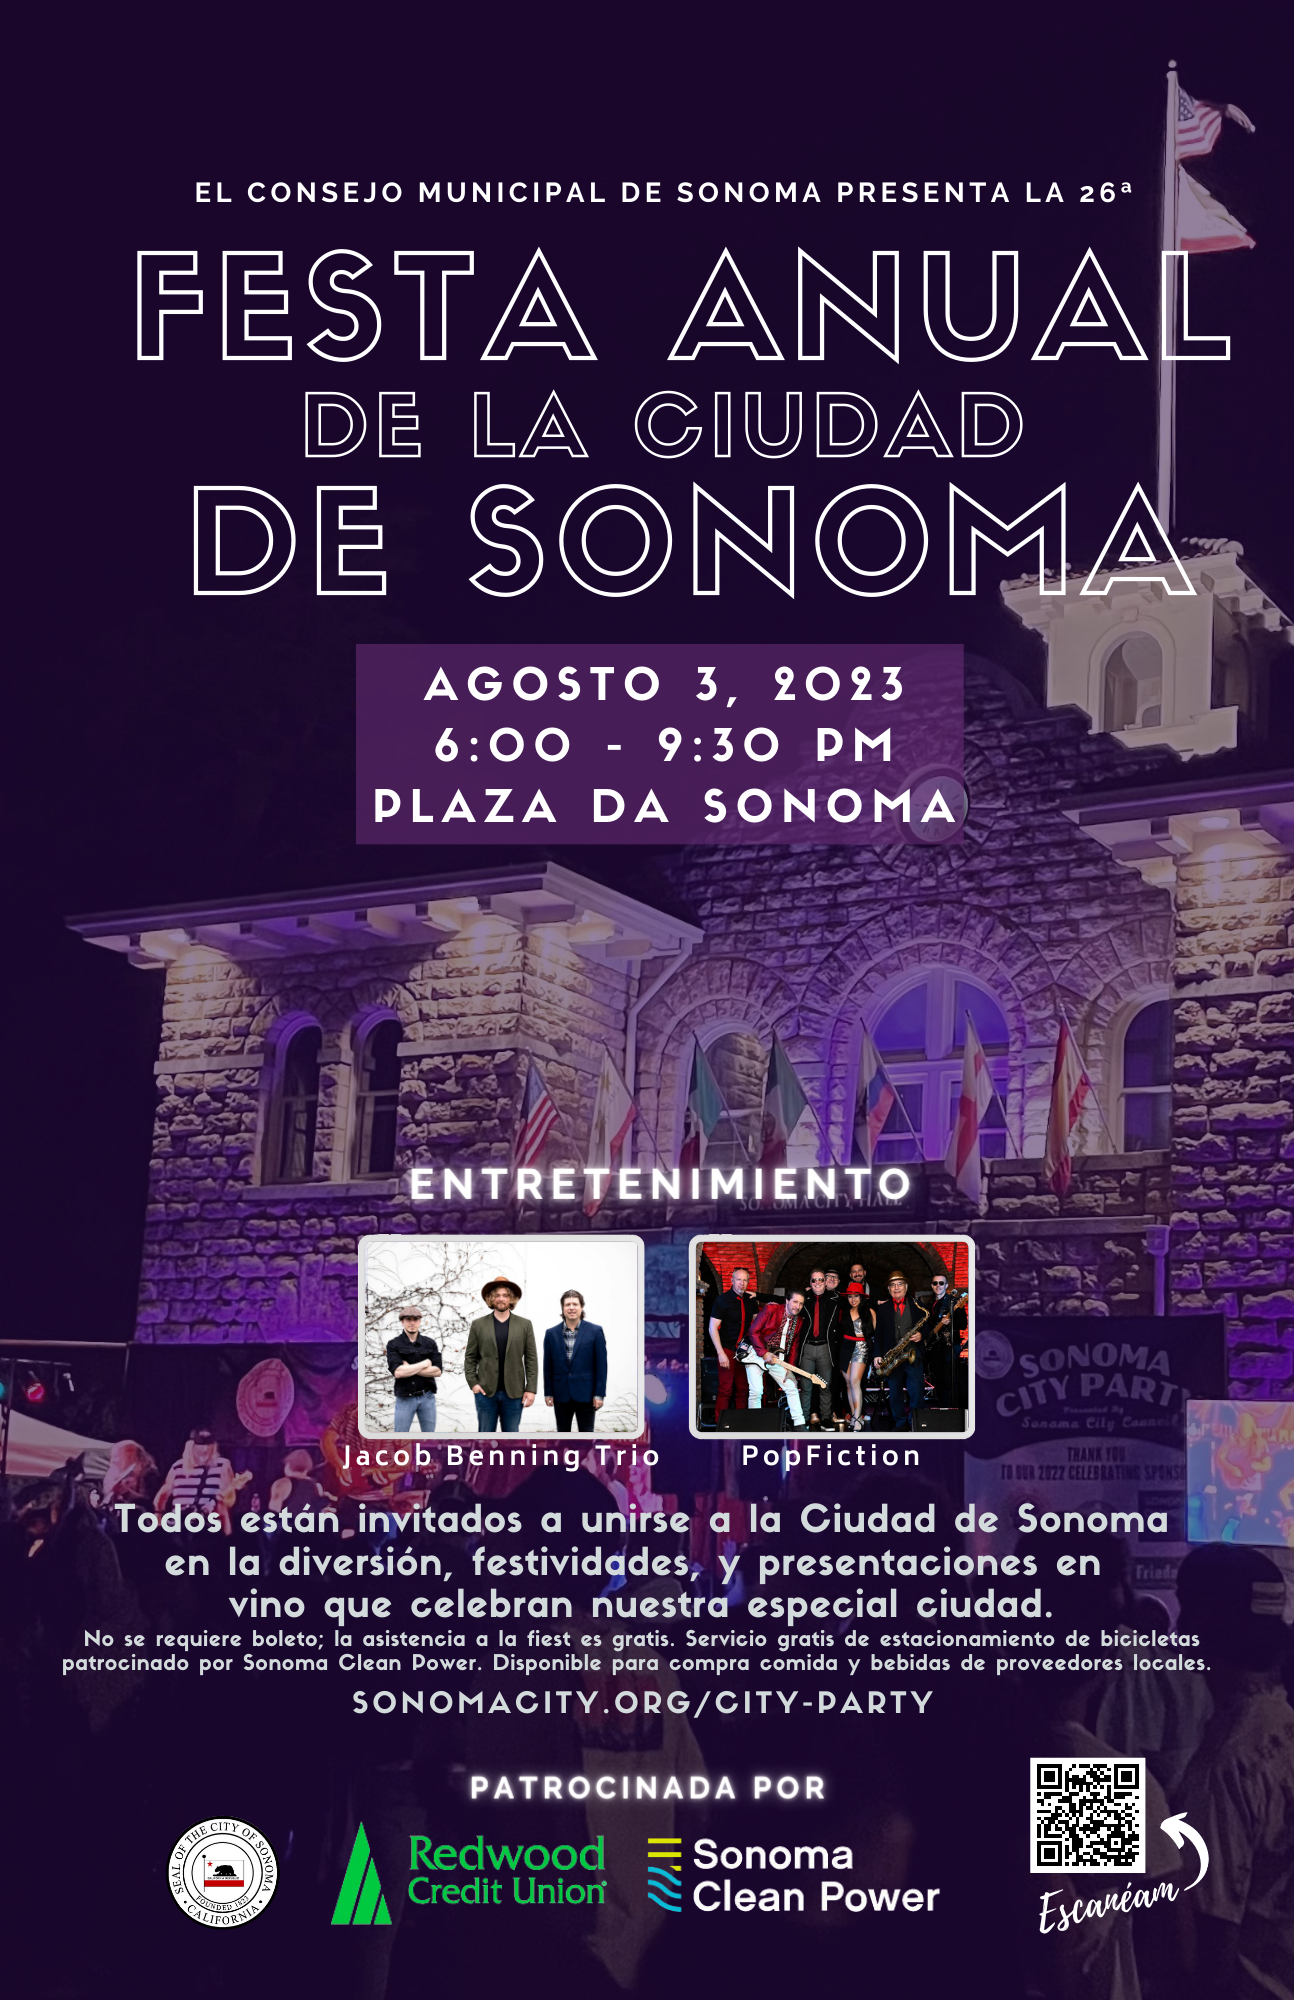 11x17 inch Flyer in Spanish promoting the Sonoma City Party on August 3rd, 2023 featuring a Photo of Sonoma City Hall lit up with a stage performance in front and a crowd watching.